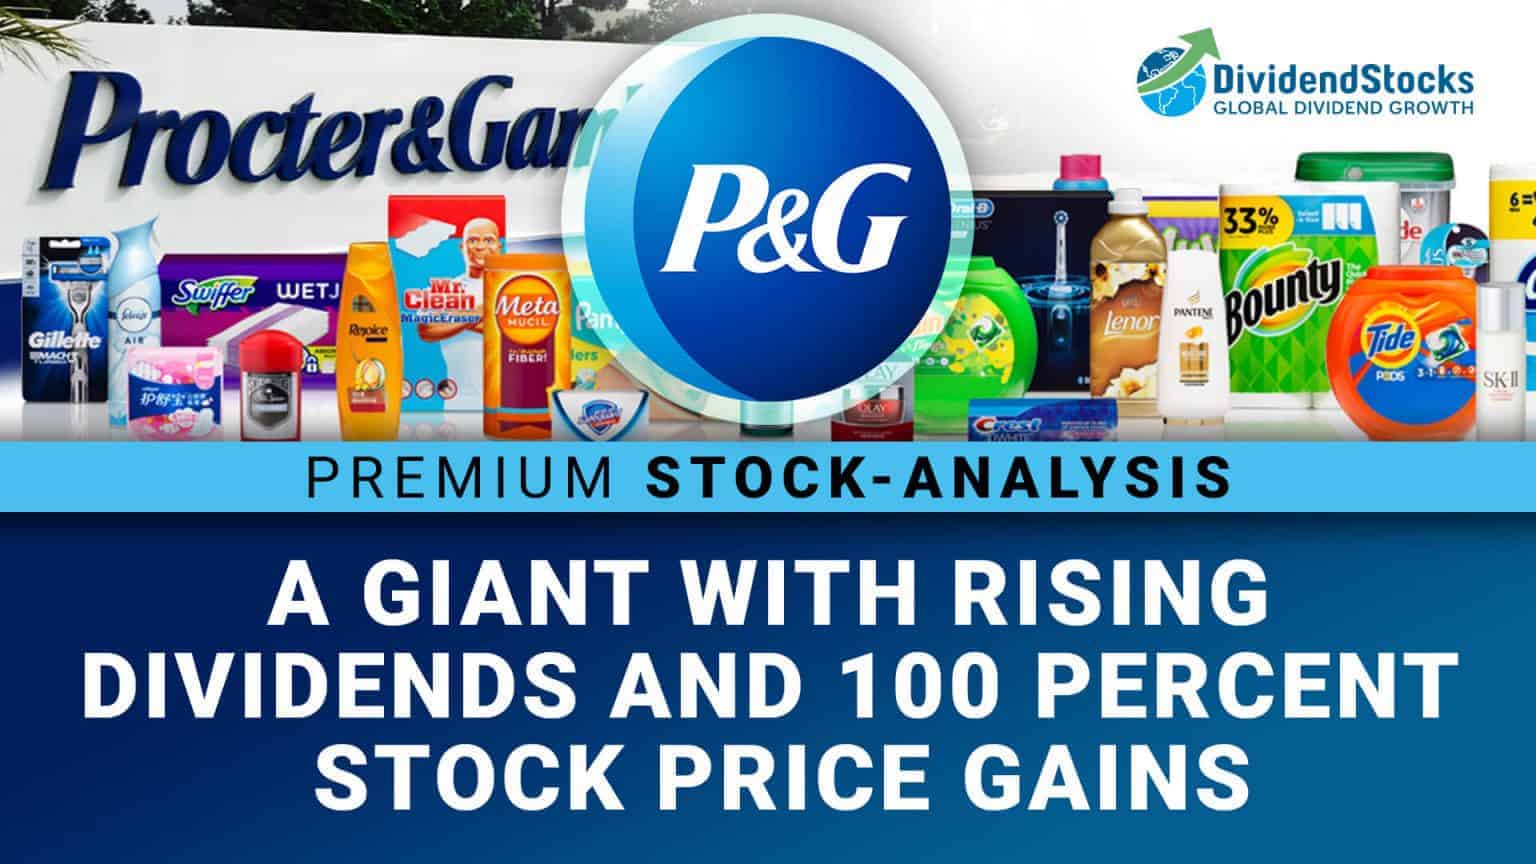 Procter & Gamble stock A giant with rising dividends and 100 percent